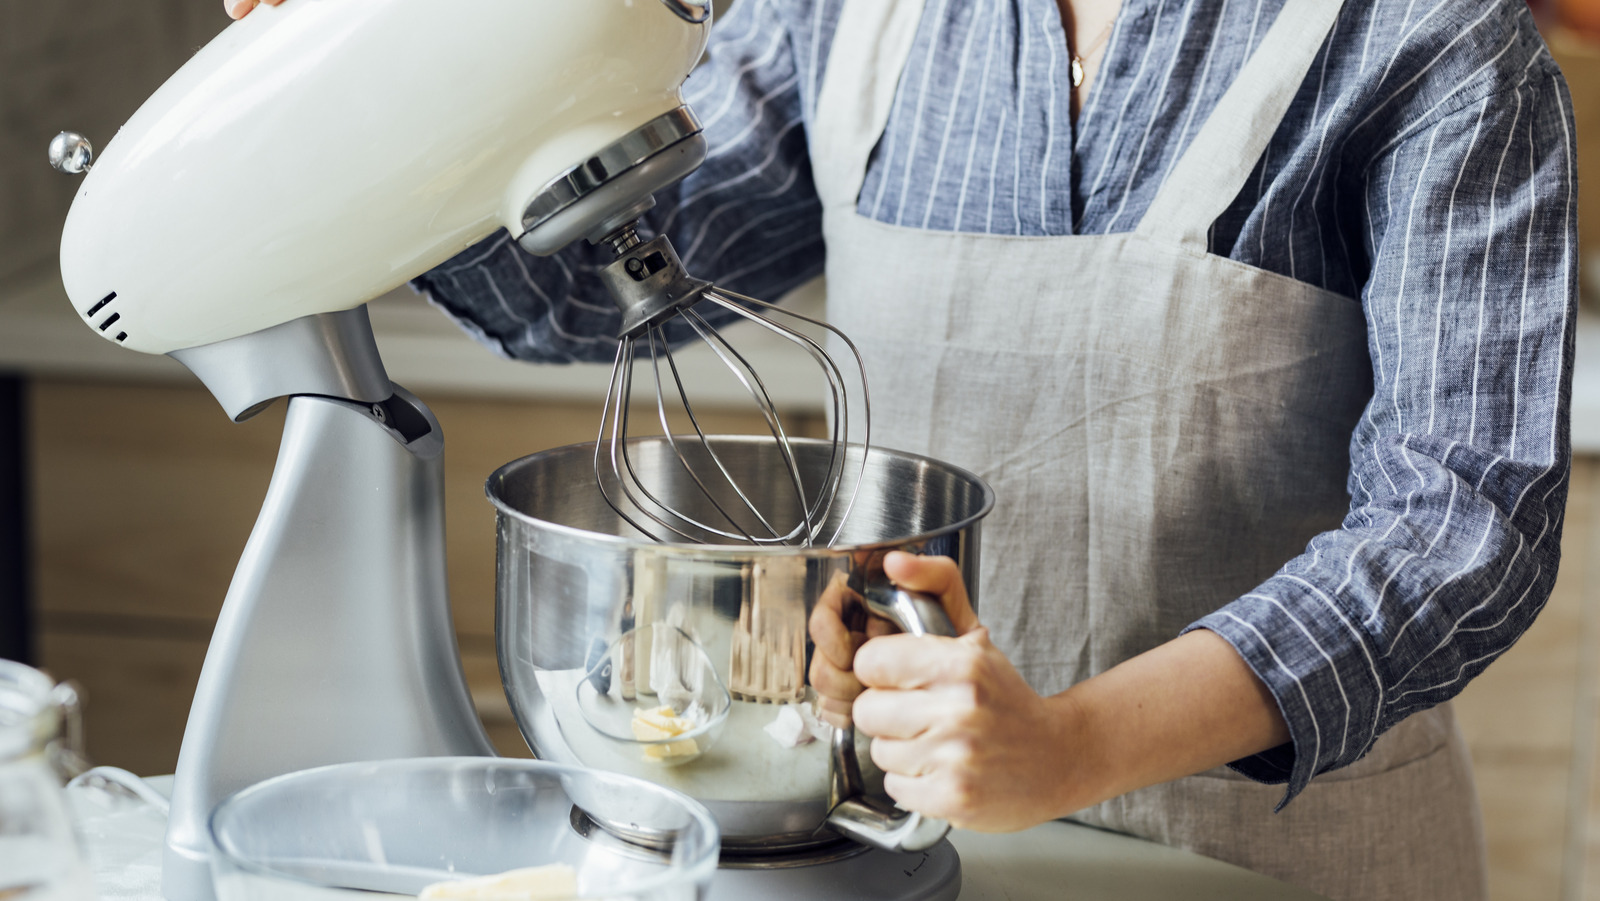 How to Clean a Stand Mixer - CNET